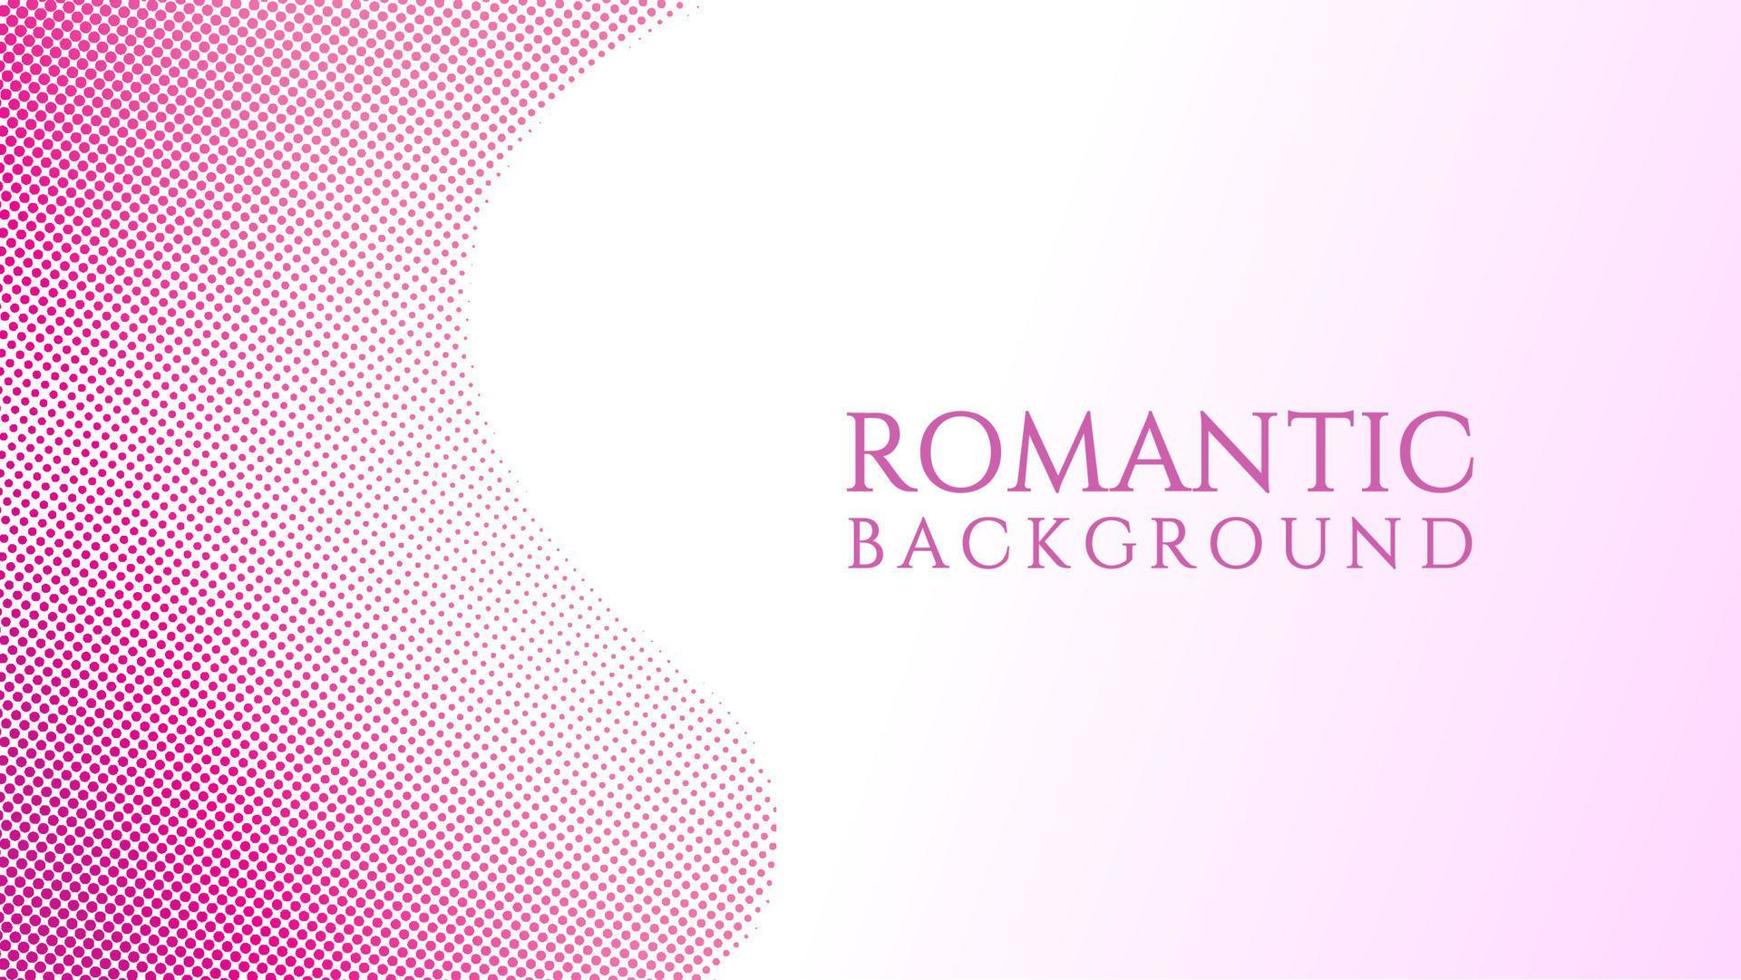 Halftone Background Design Template, Abstract Dots Pattern Illustration, Retro Texture Element, Pink Violet Gradation, Romantic Color, Valentine Day vector